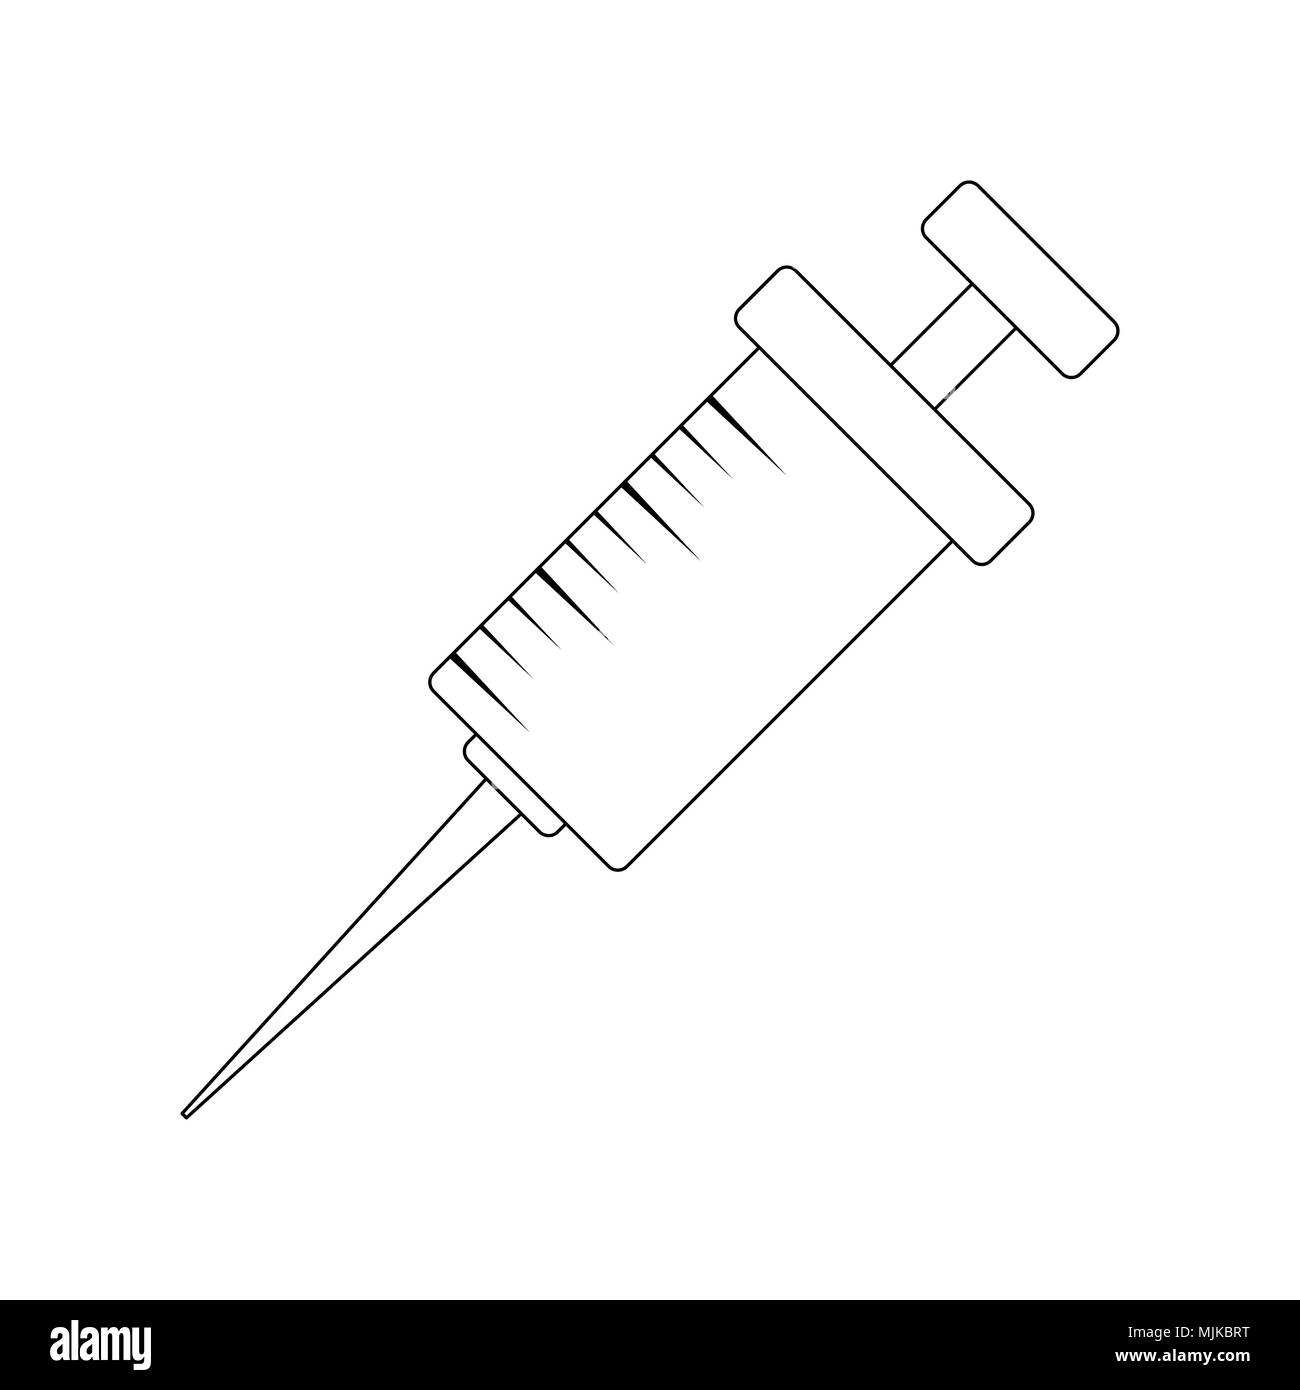 Cartoon syringe, injection outline isolated on white background Stock Vector